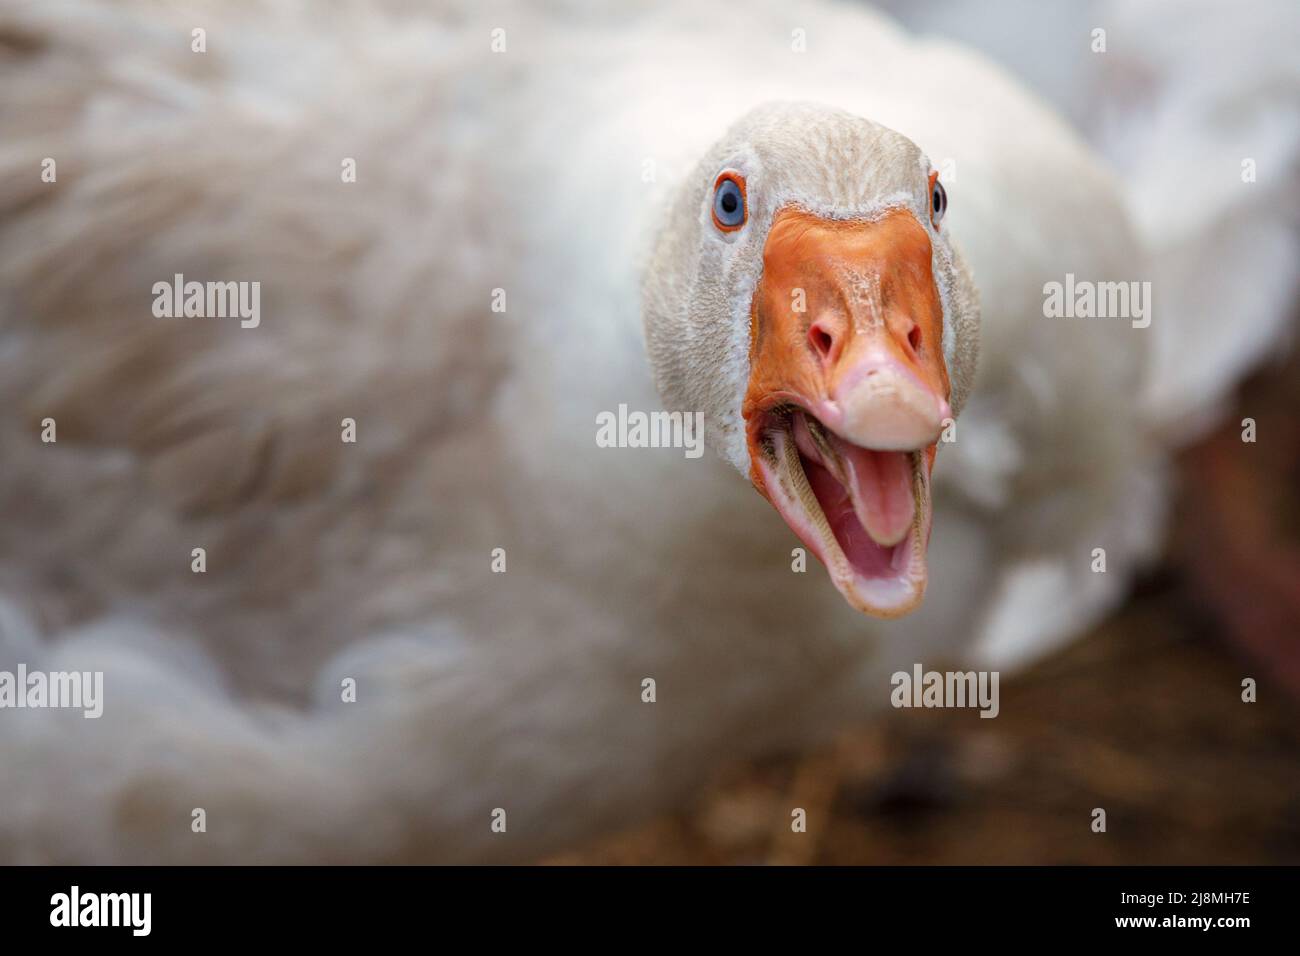 Beak and Face of White Goose. The duck is aggressive she is angry and hissing Stock Photo